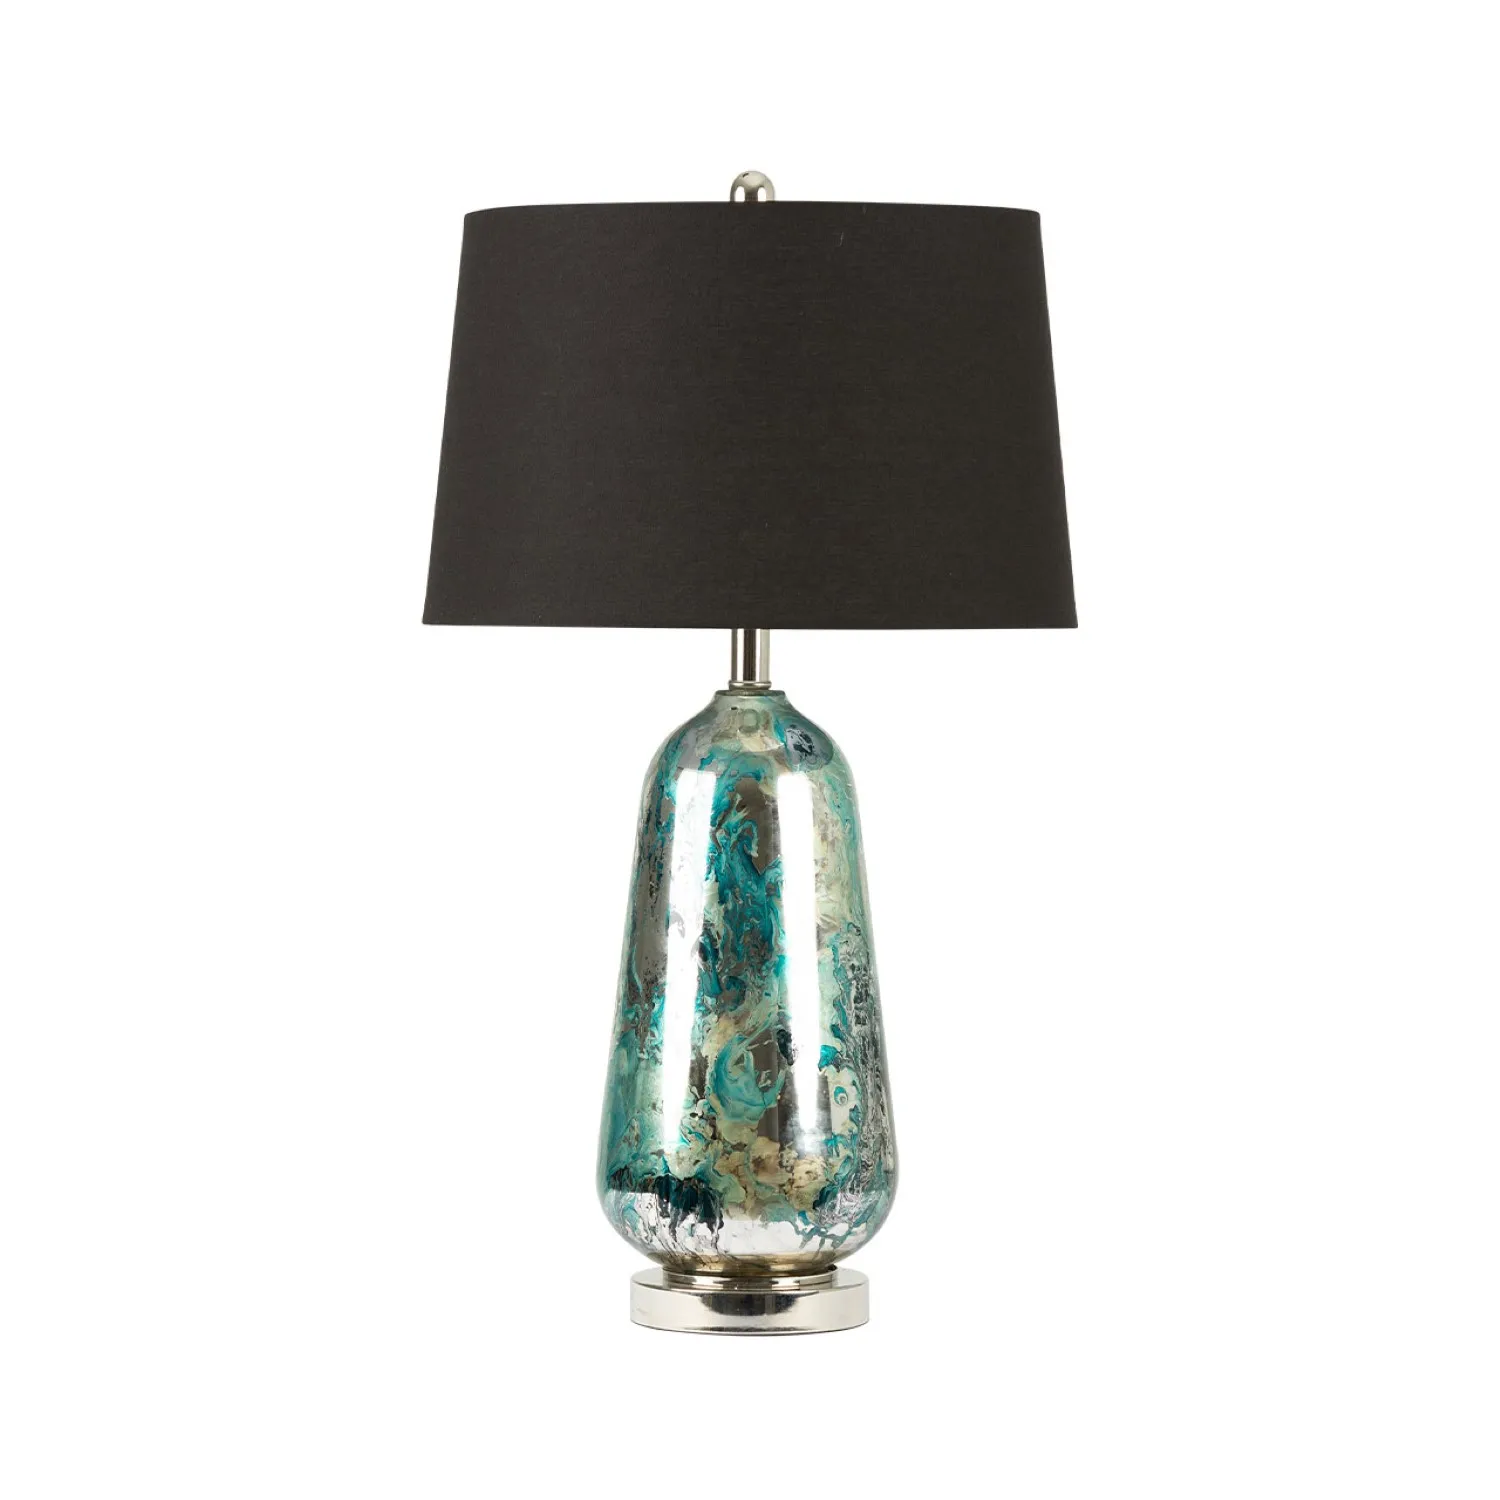 72. 4cm Blue And Silver Glass Table Lamp With Black Linen Shade